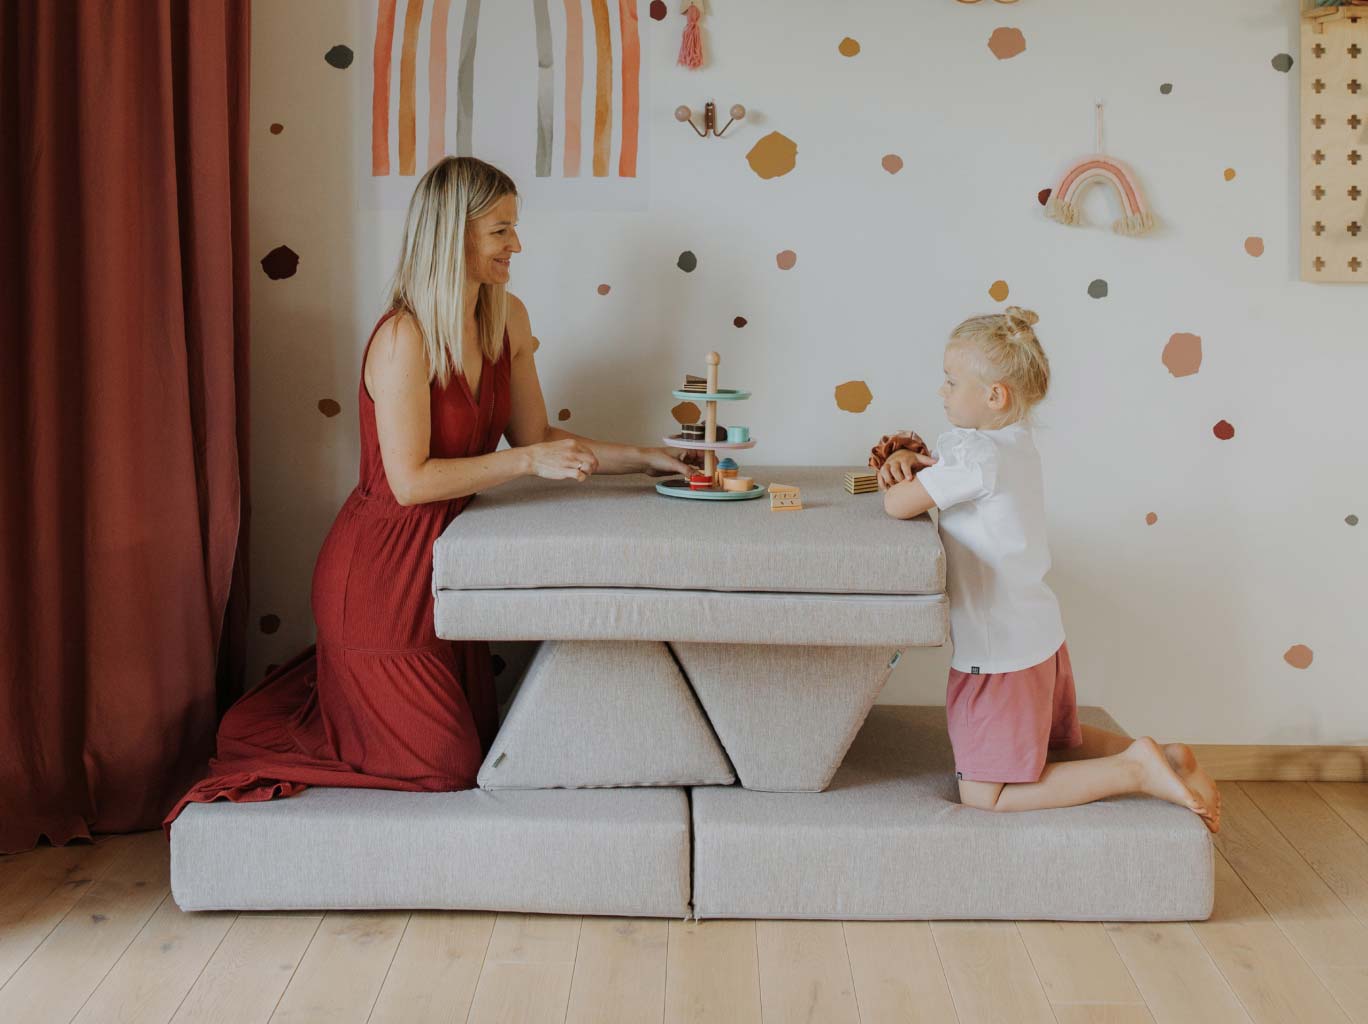 Mommy and daughter playing tea time on their Monboxy play sofa set